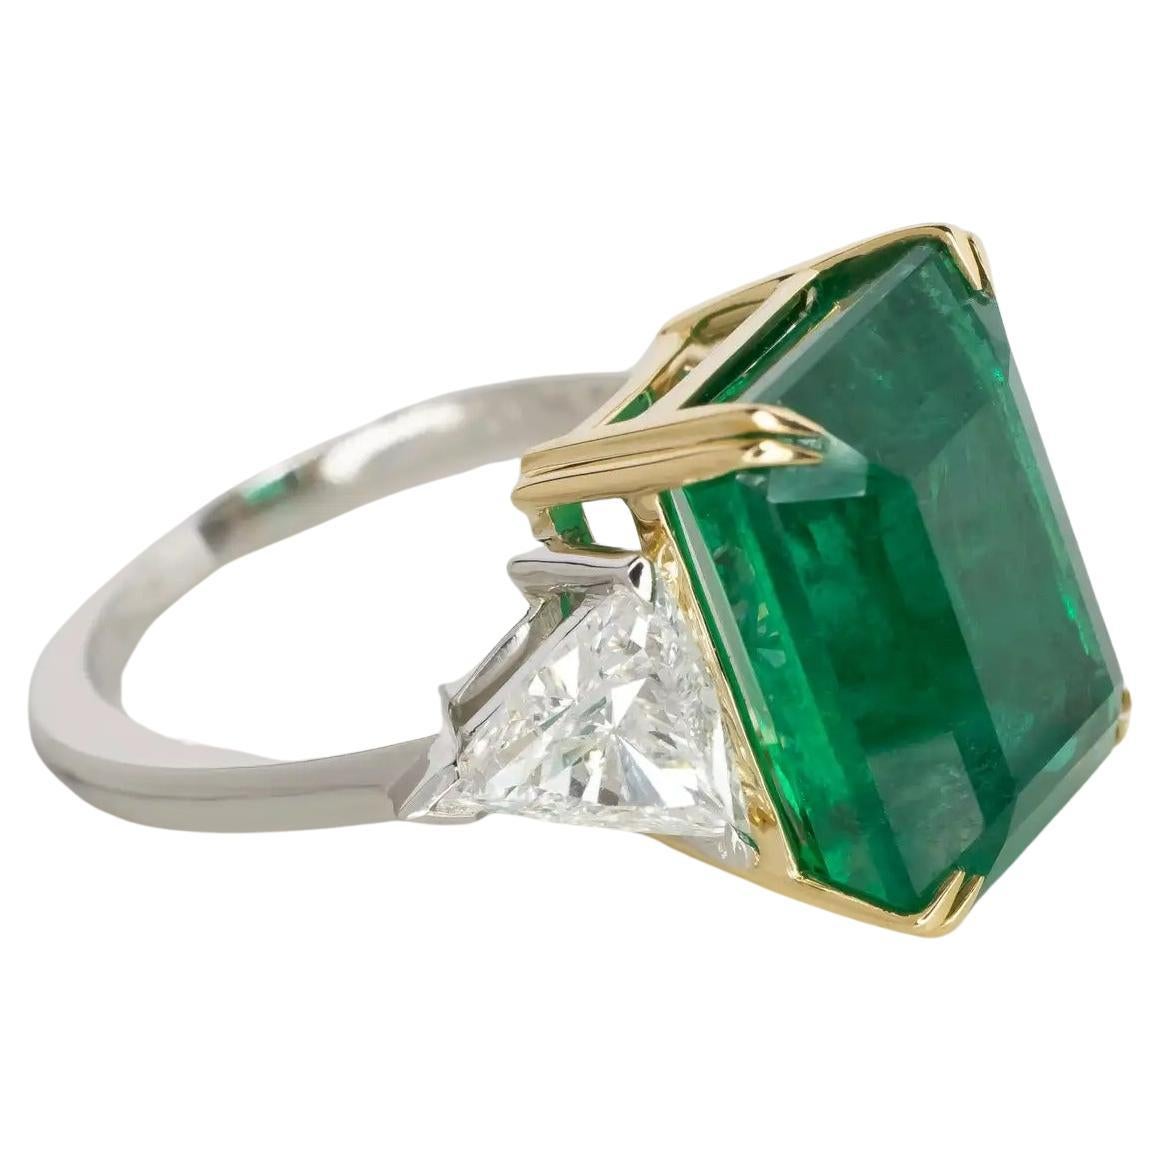 AGL Certified 13.35 Carat Vivid Green Emerald Trillion Diamond Ring 
the main emerald is extremely high quality with minimal inclusions and great color!!
the side trillion diamonds are very high quality and both comes with Grs report.
Set in 18K